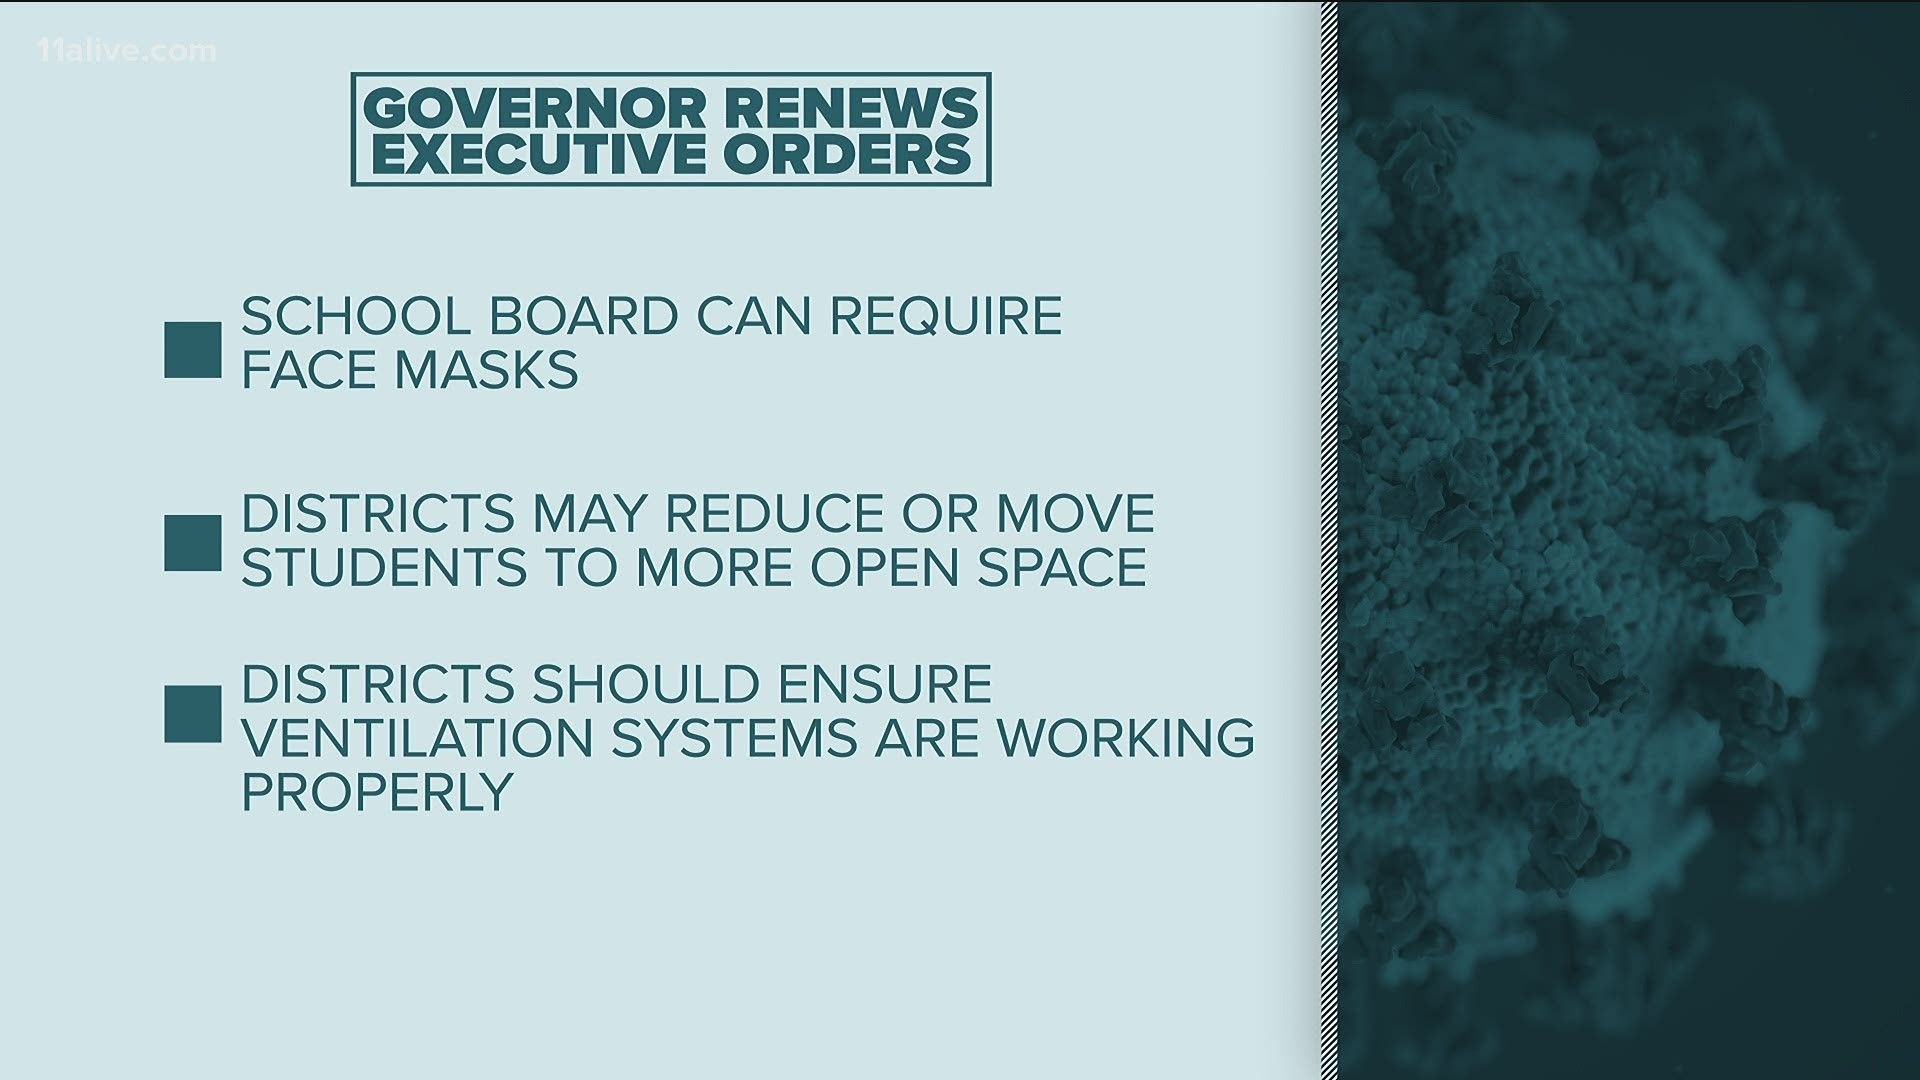 School boards can require face masks.